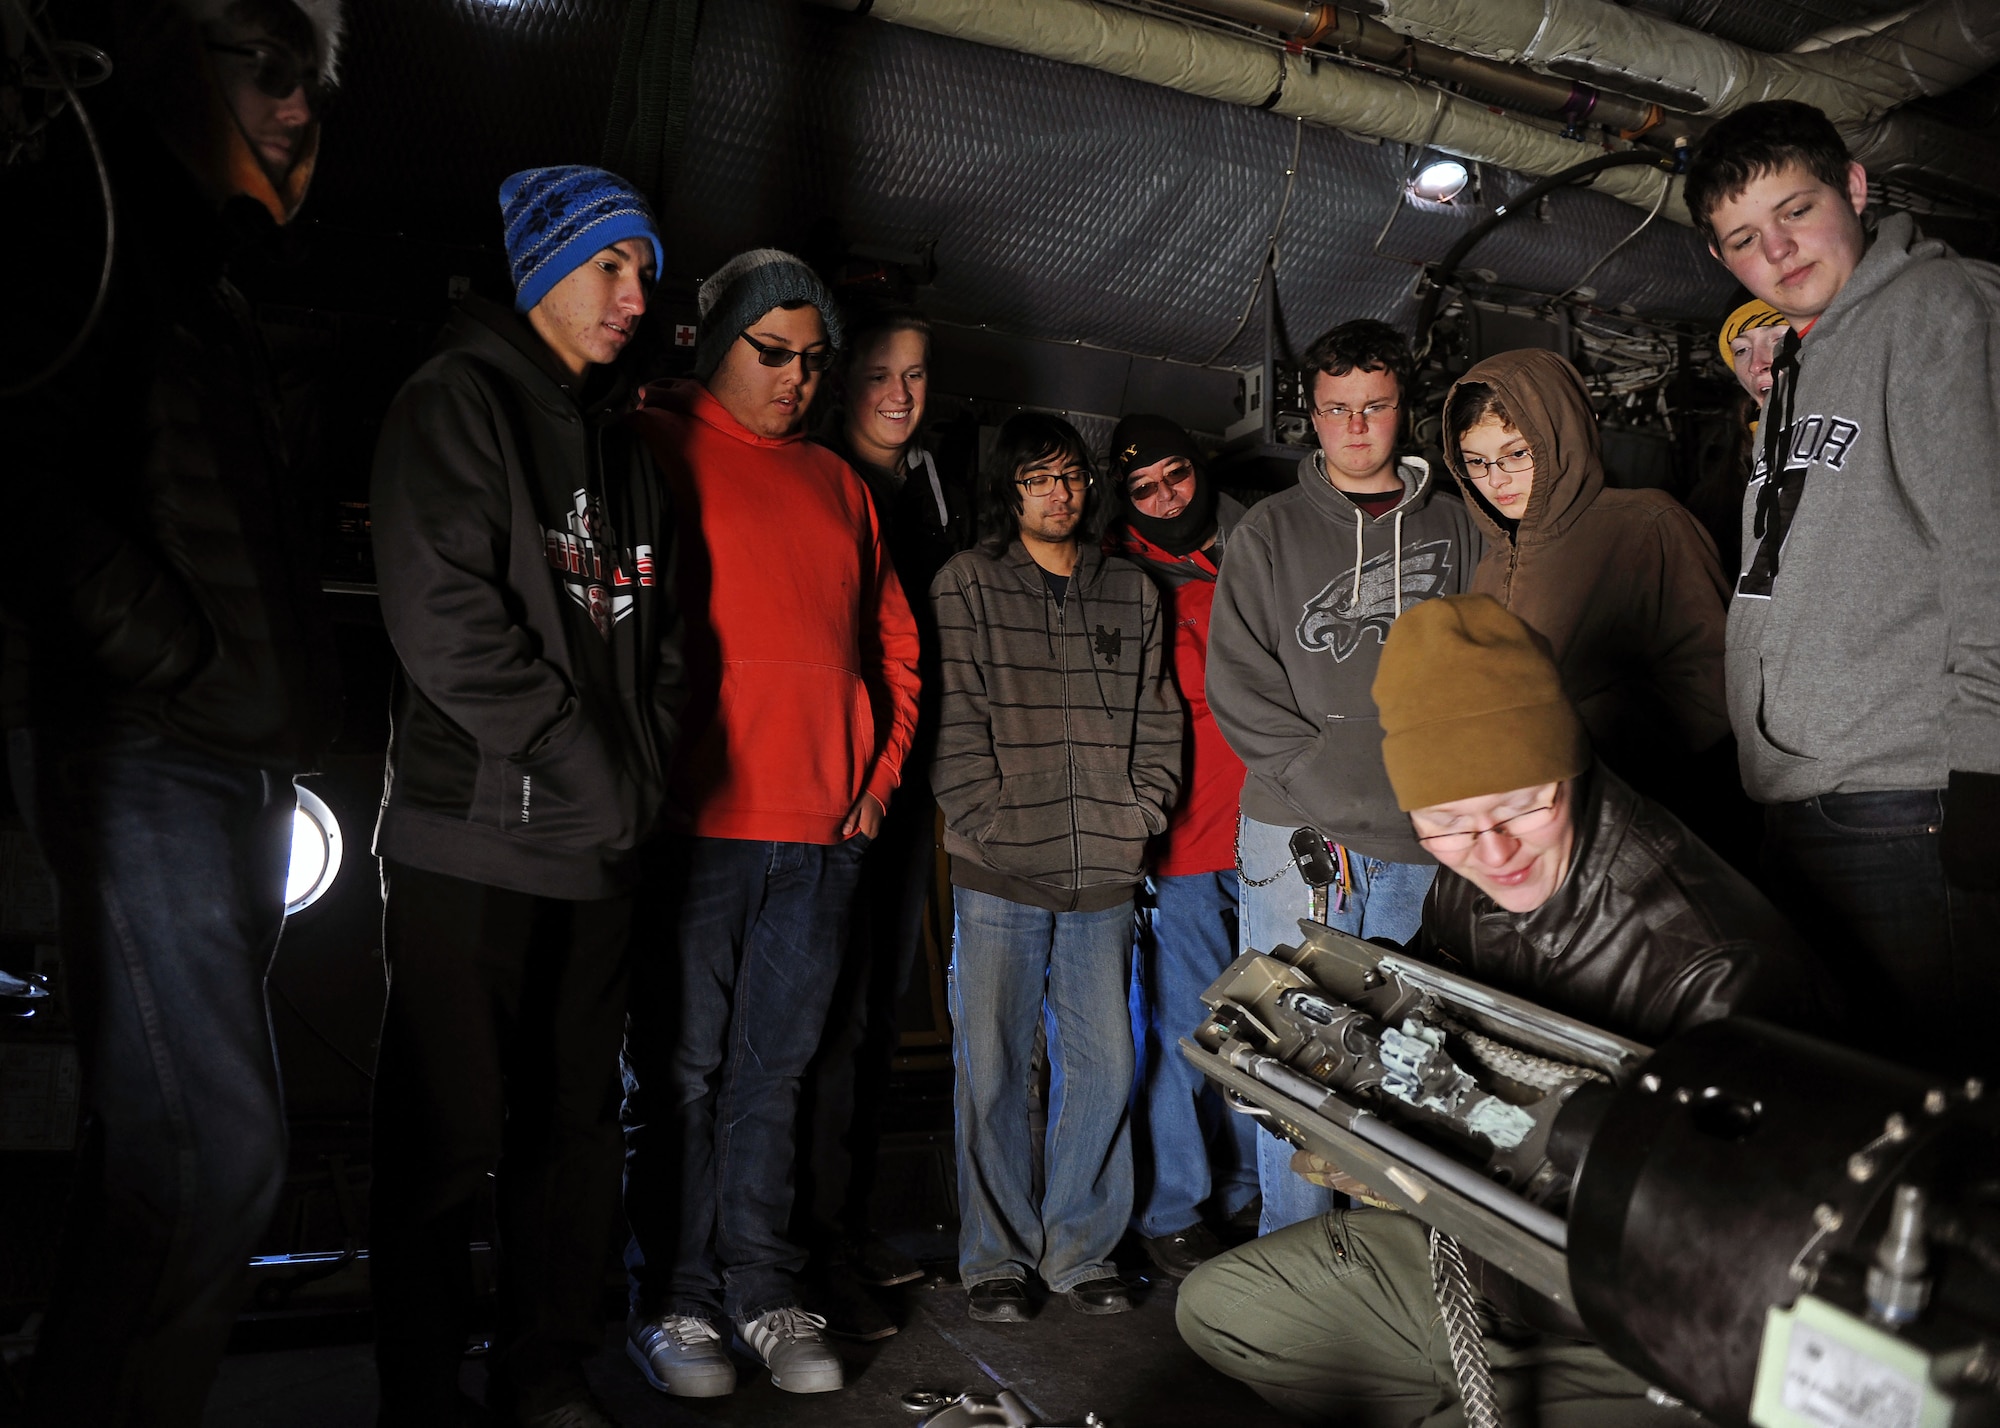 Senior Airman Nick Matthews, 16th Special Operations Squadron Special Missions aviator, reassembles a weapon system after breaking it down and explaining its operating system to Portales High School Math Engineering and Science Achievement club members, Dec. 9, 2016, during a tour at Cannon Air Force Base, N.M. The tour, which consisted of an AC-130 technology brief and an in-depth look at a powered-on AC-130W, was designed to give students a practical look at real world math, engineering and science applications. (U.S. Air Force photo by Staff Sgt. Whitney Amstutz/Released)